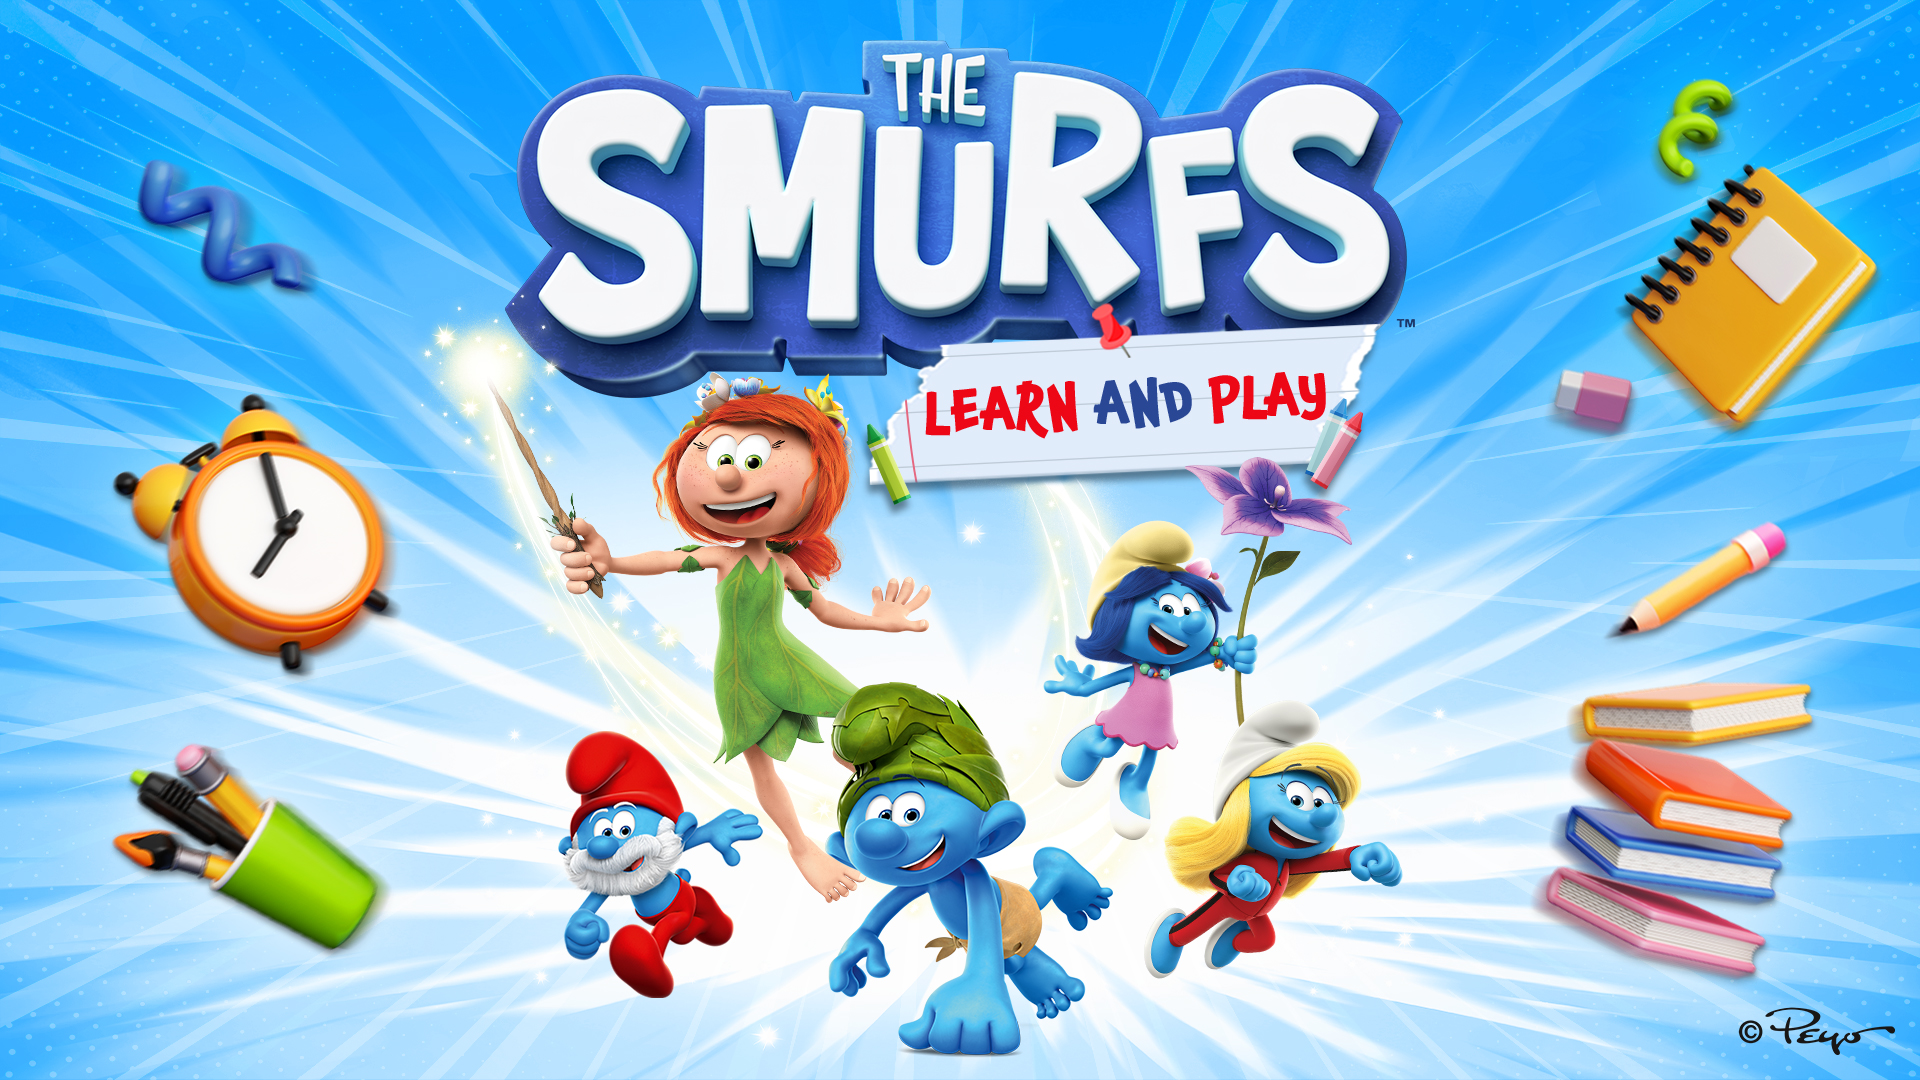 The Smurfs: Learn and Play